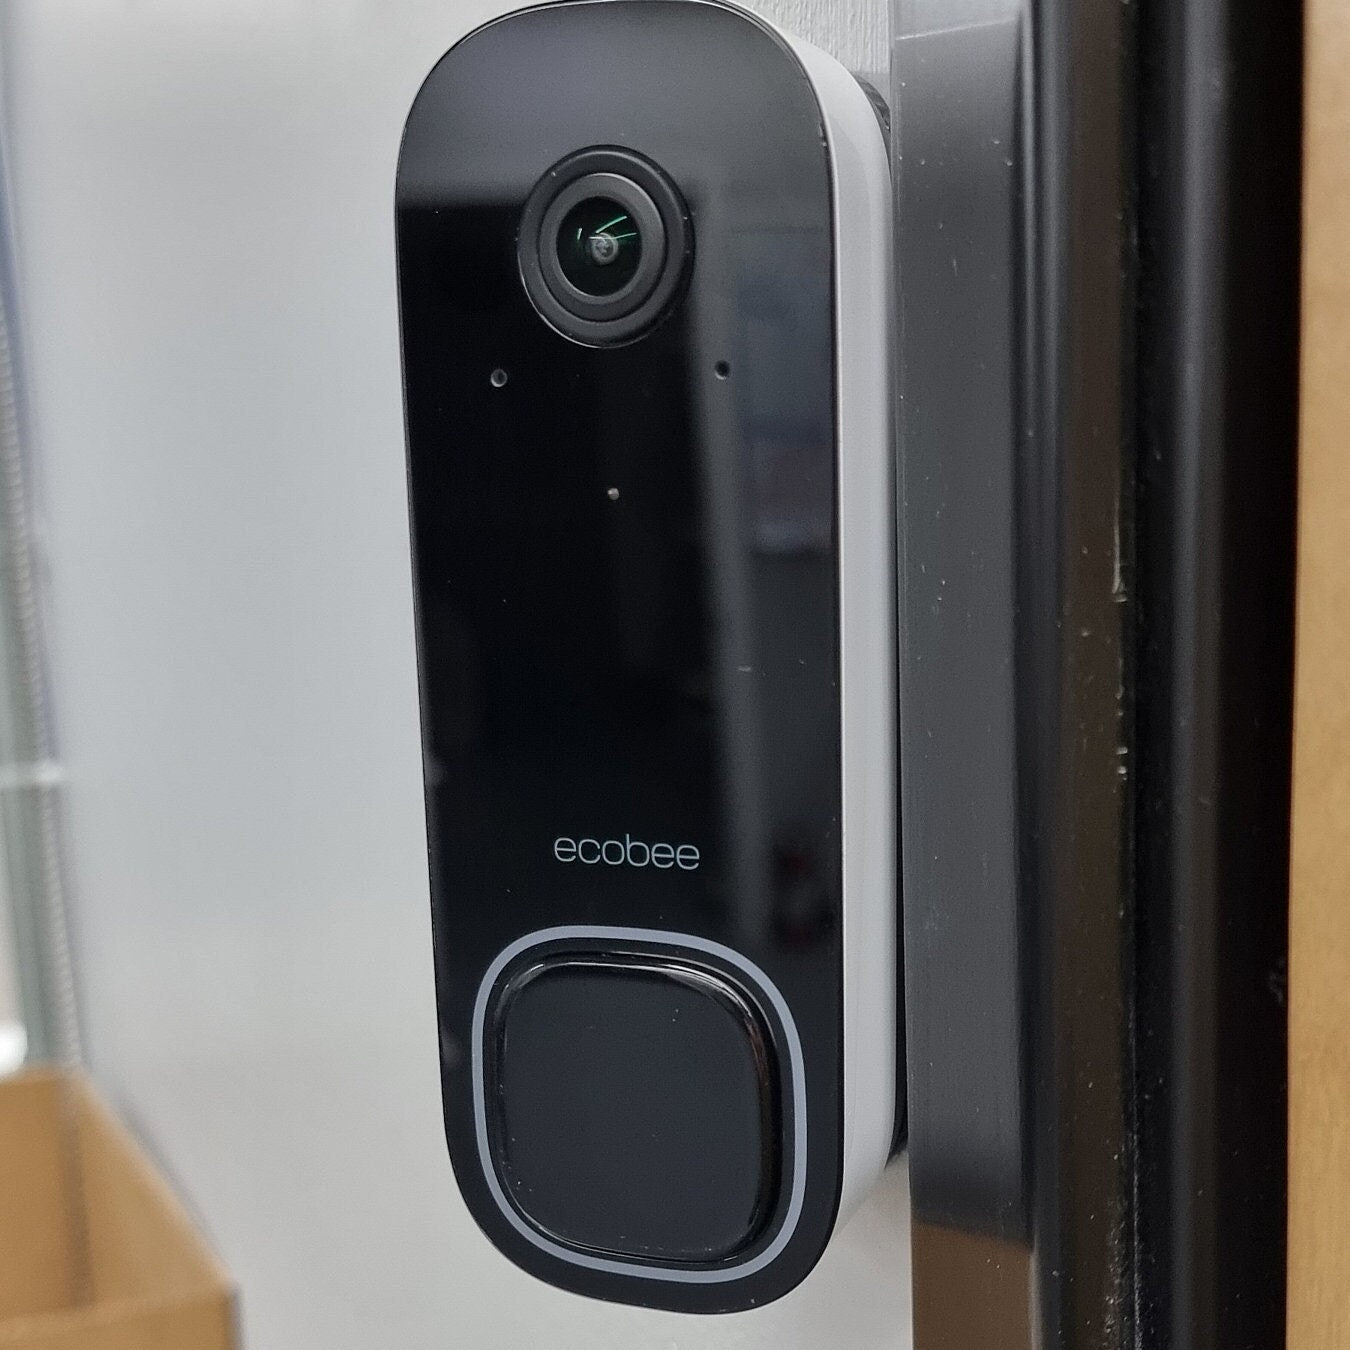 Ecobee Video Doorbell Mount, 90 Degree Angle. Get The Perfect Viewing Angle For Your Ecobee Video Doorbell